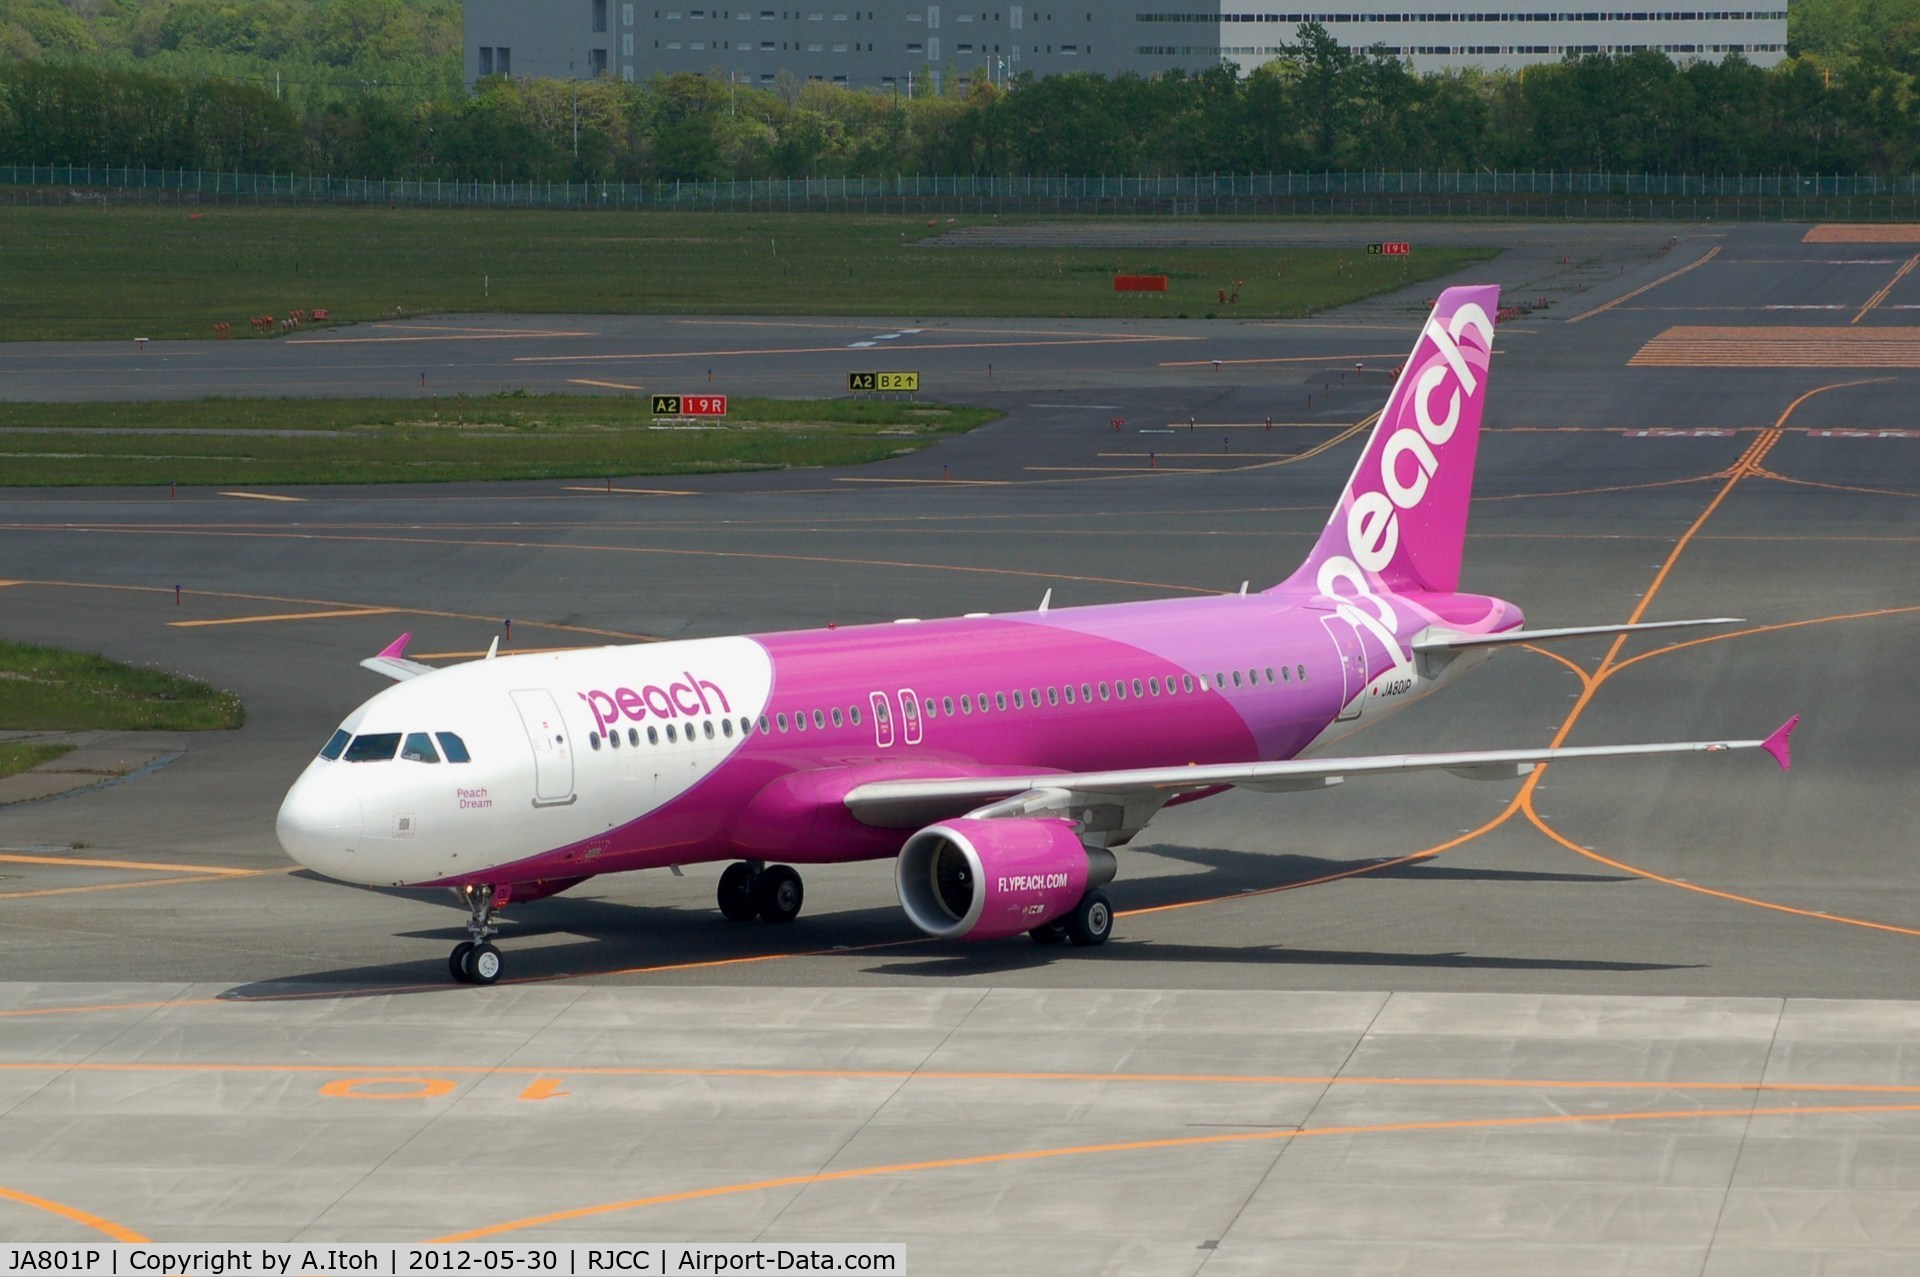 JA801P, 2011 Airbus A320-214 C/N 4887, Taxi New Chitose